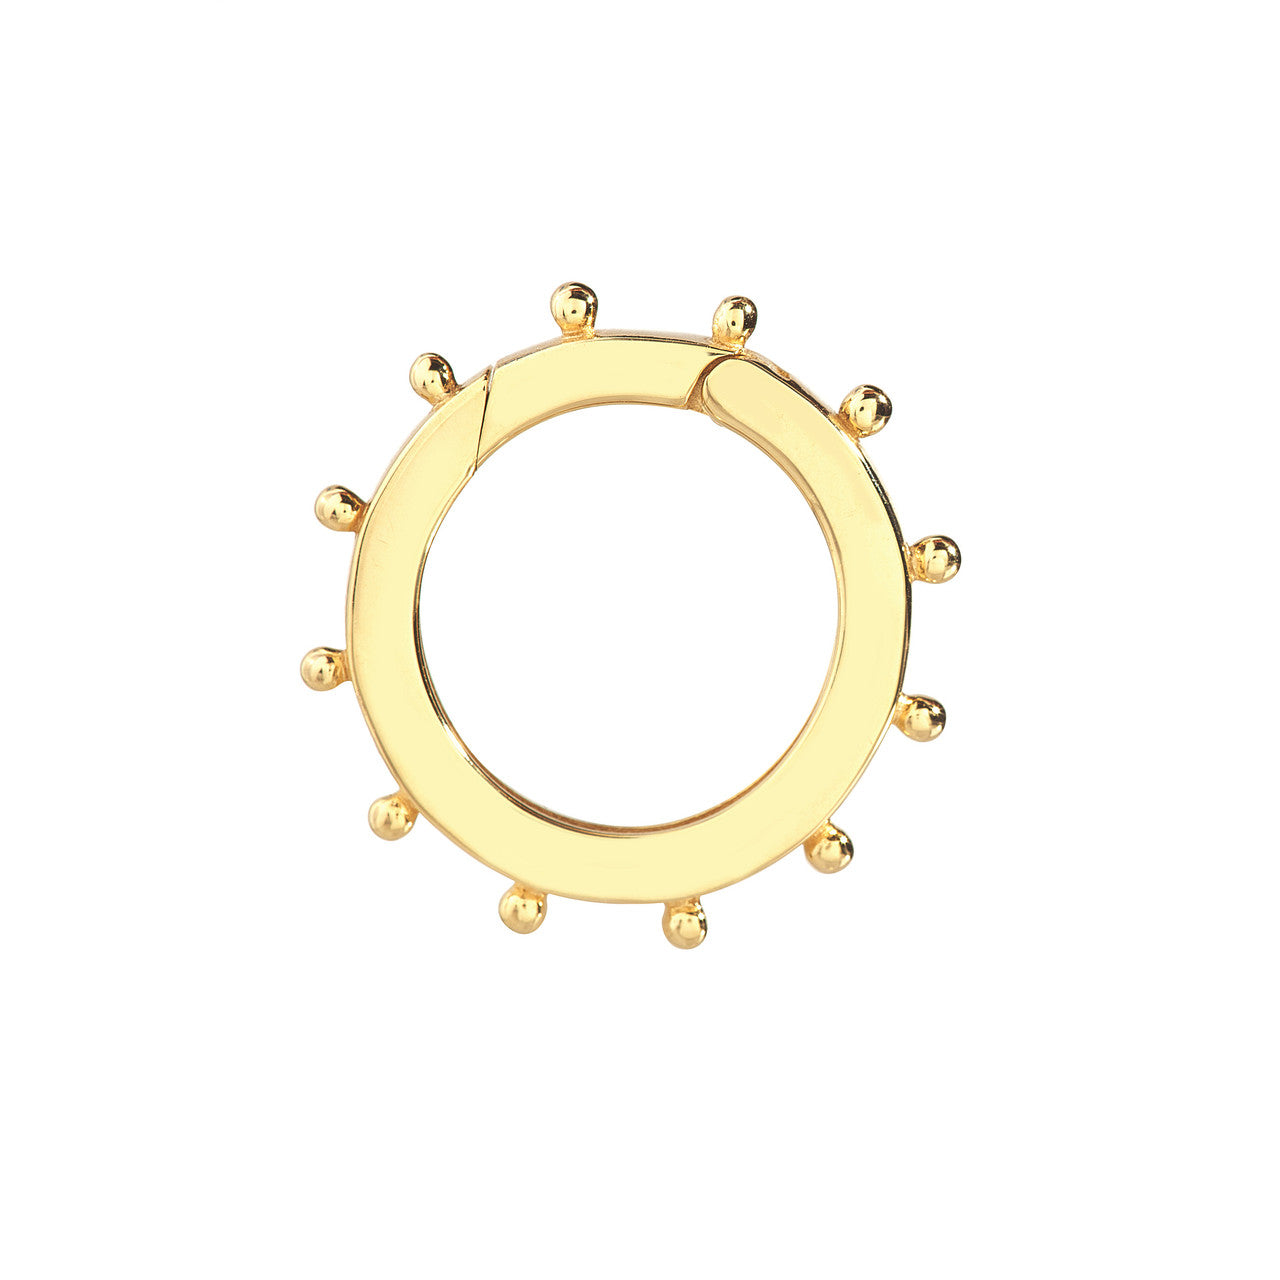 14K Yellow Gold 20mm Beaded Large Round Push Clasp Lock Connector Enhancer Hanger for Pendants Charms Bracelets Anklets Necklaces Chains